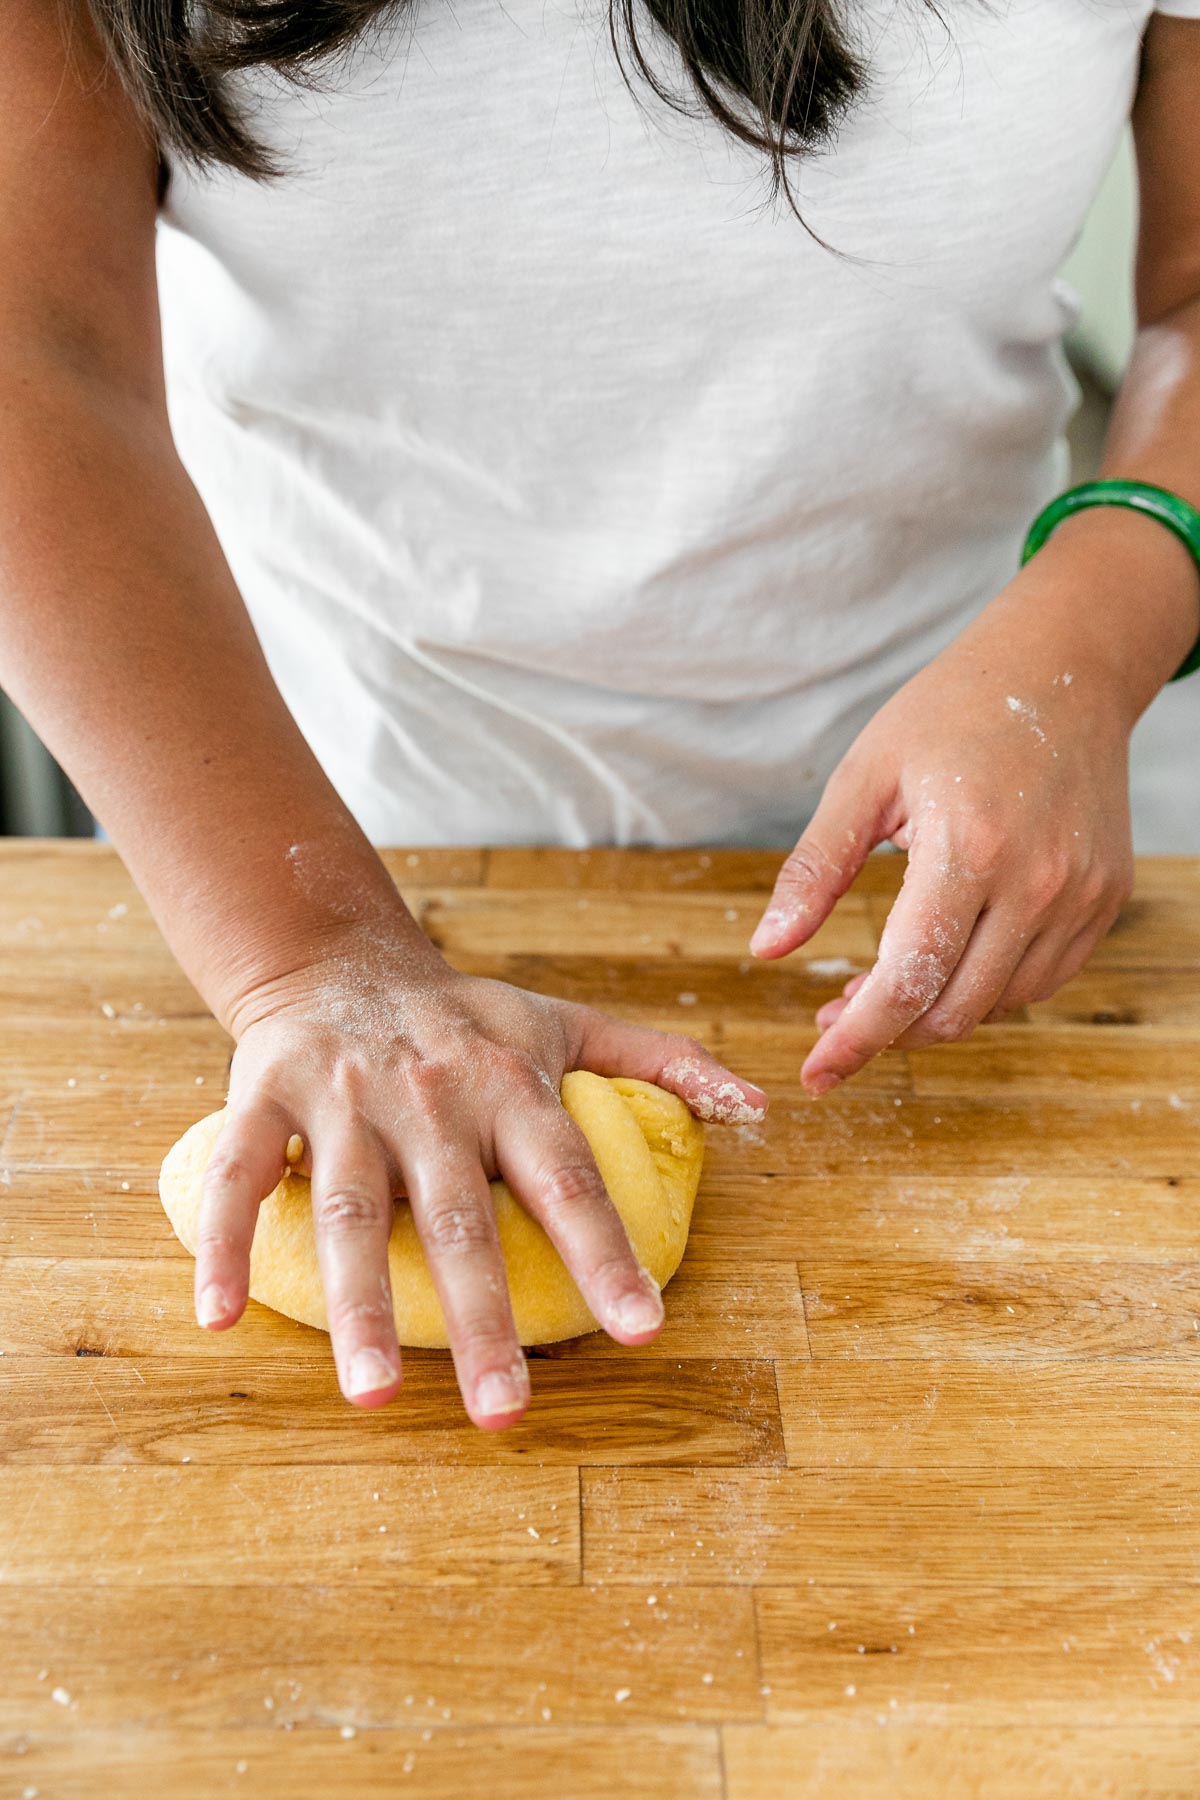 How to Make Homemade Pasta, Step 3: Knead the Pasta Dough. Jess of Plays Well With Butter uses her hands to knead the fresh pasta dough ball until it becomes smooth & supple. The ​dough ball is being kneaded on a clean butcher block countertop.